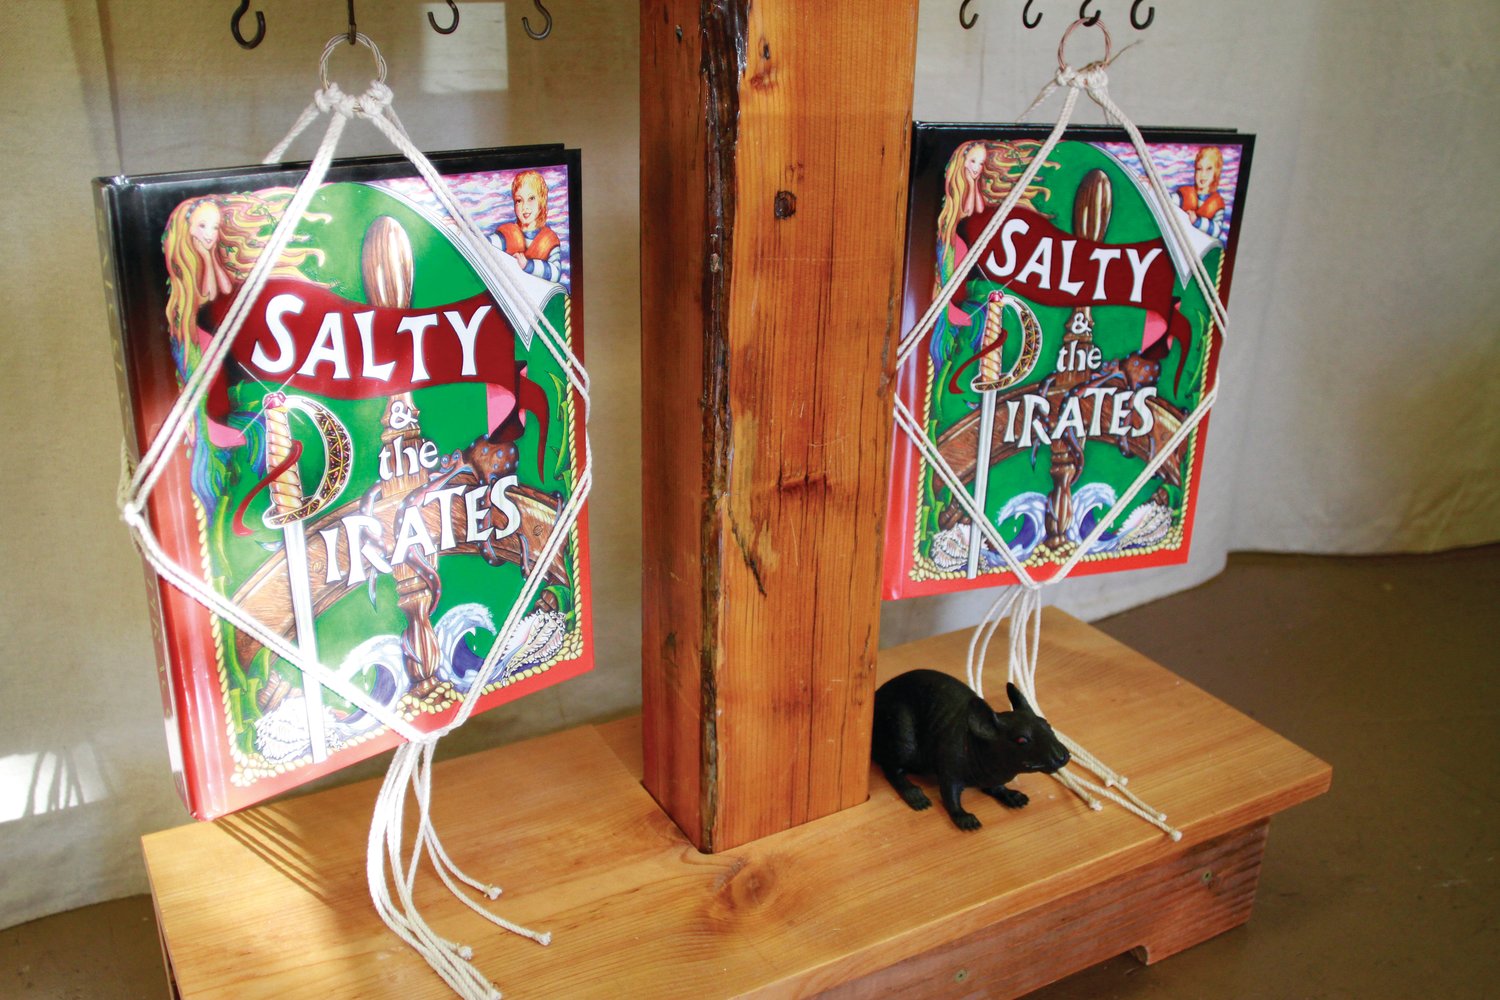 “Salty & the Pirates,” the new children’s book by local artist Marie Delaney, on sale at The Artful Sailor. It contains a narrative, pictures to be colored, and music and nautical lessons in one unique tome.